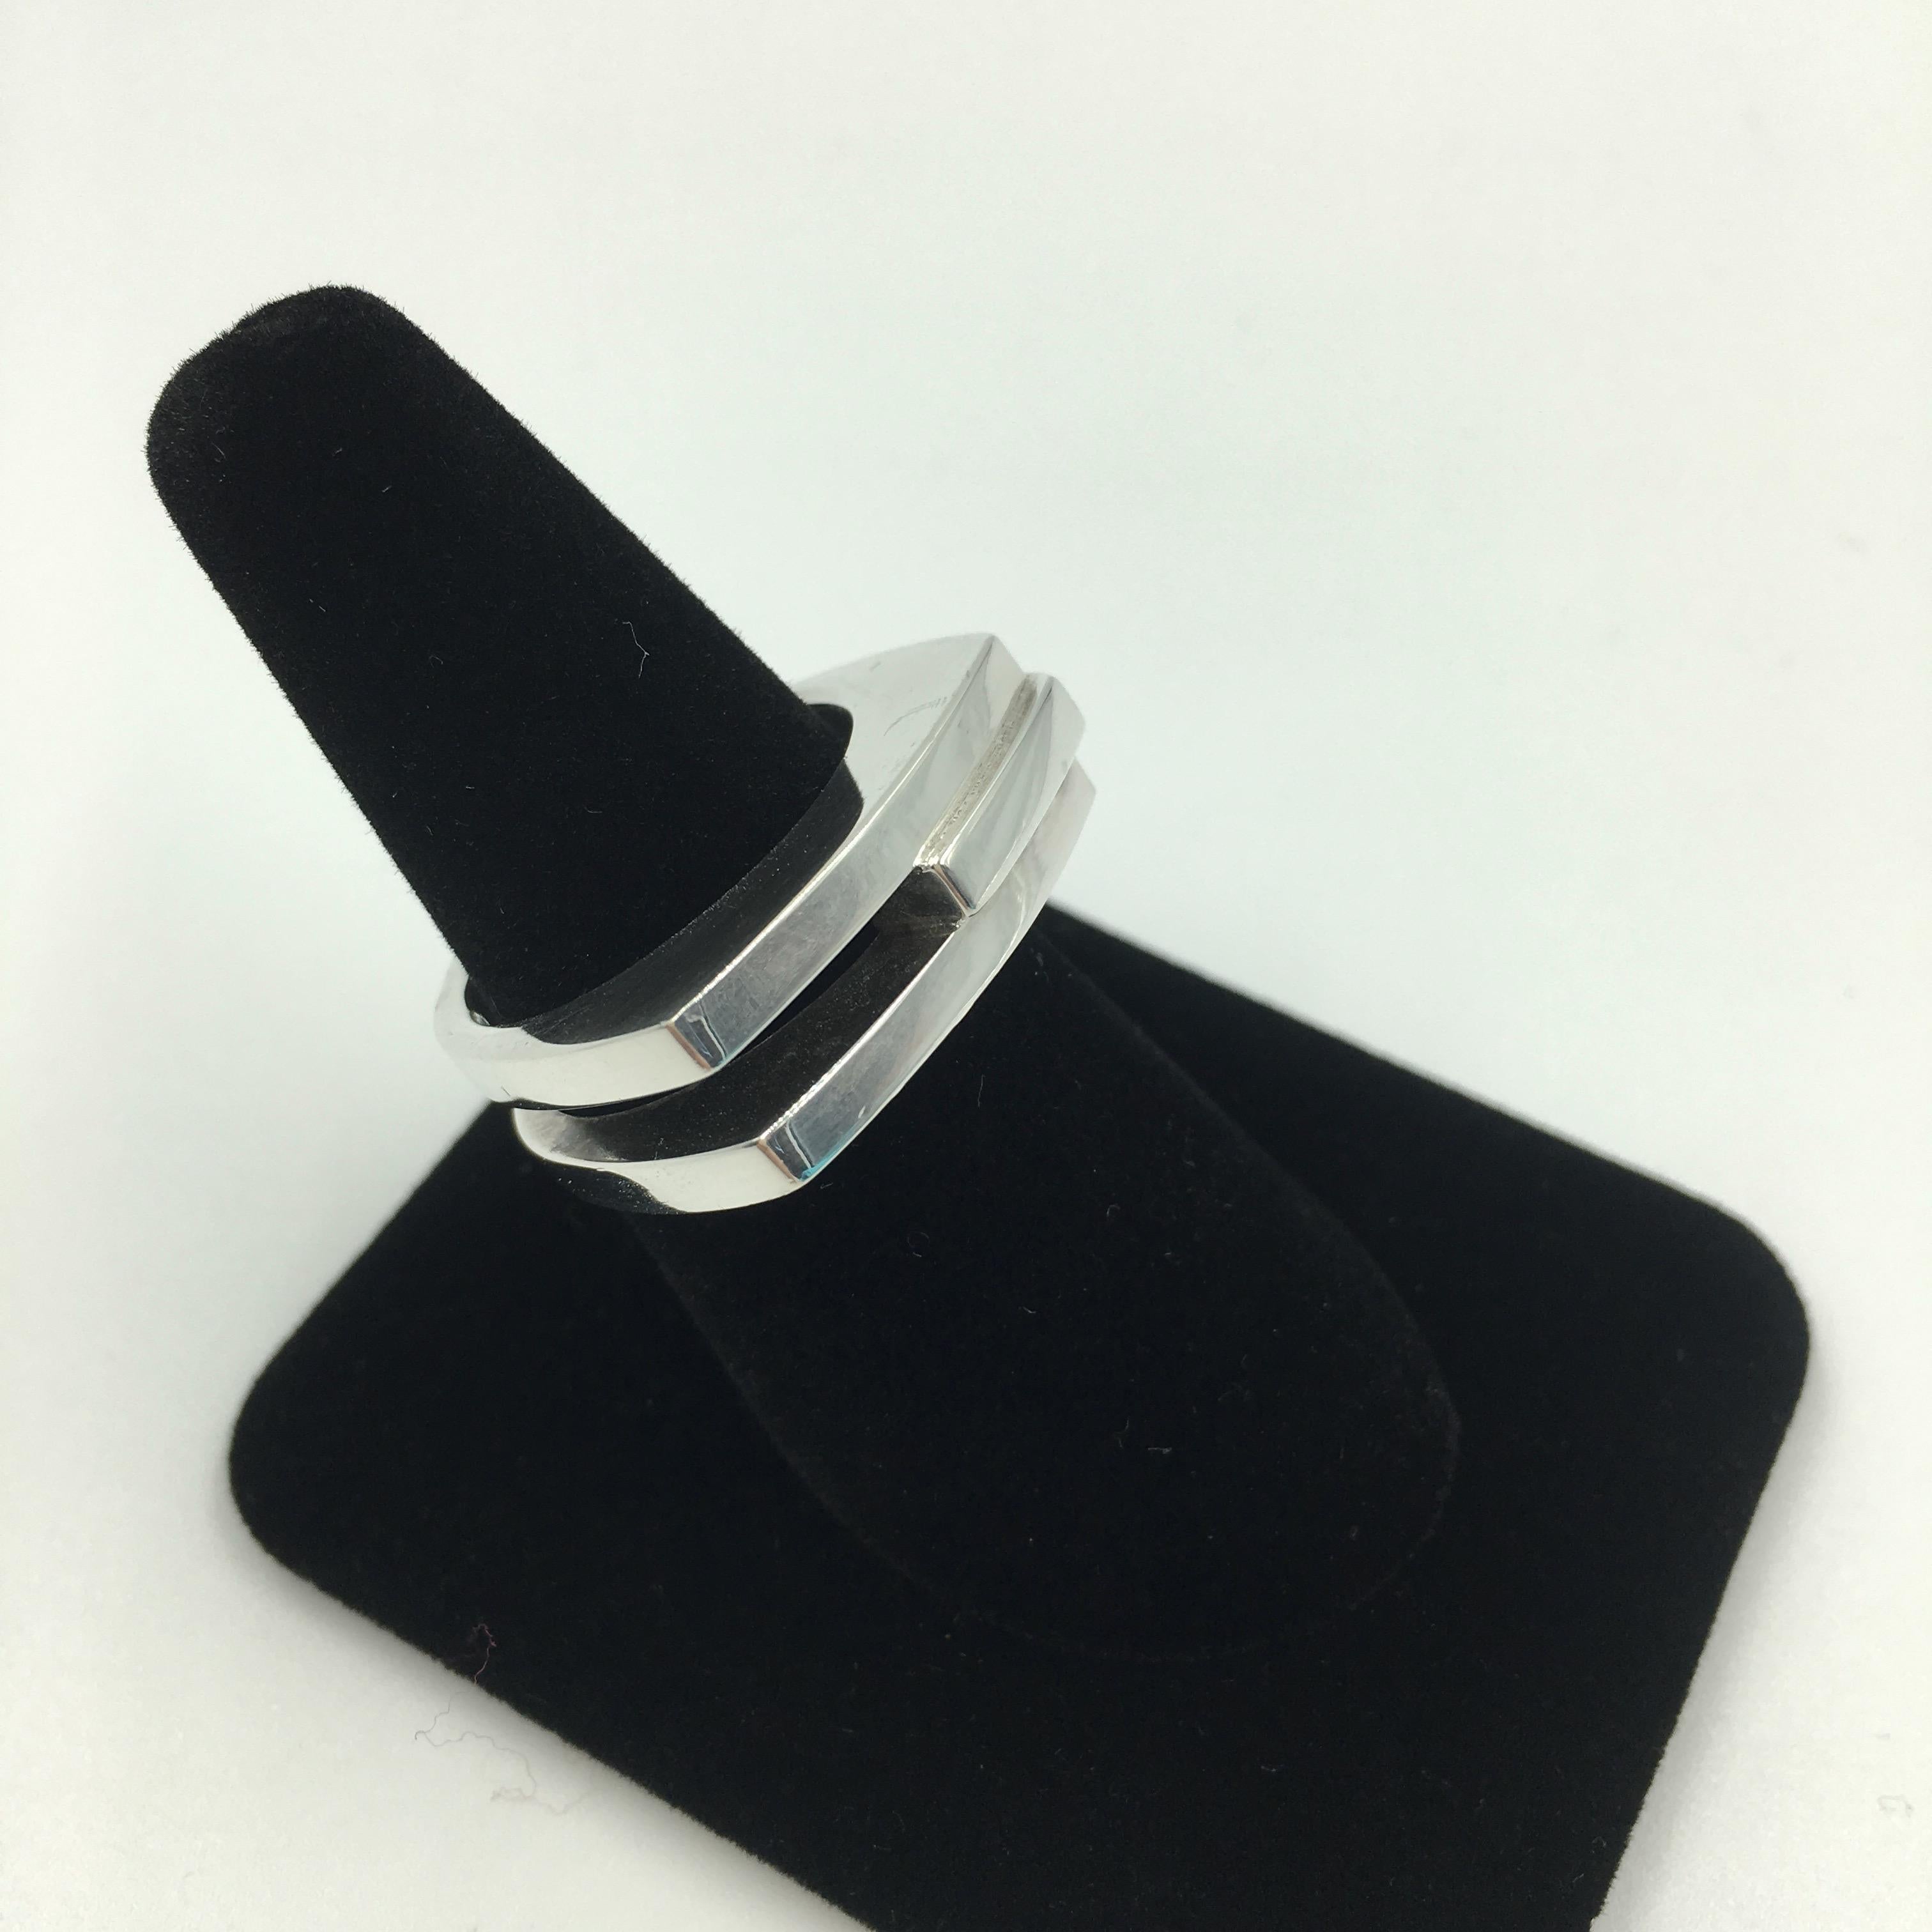 Tom Ford for Gucci Modern Three Stripe Sterling Silver Ring. Made in Italy. Stamped Gucci and 925 inside band. Good vintage condition. Small scratch on side of ring. See last photo. Unnoticeable when worn but this photo highlights it with the